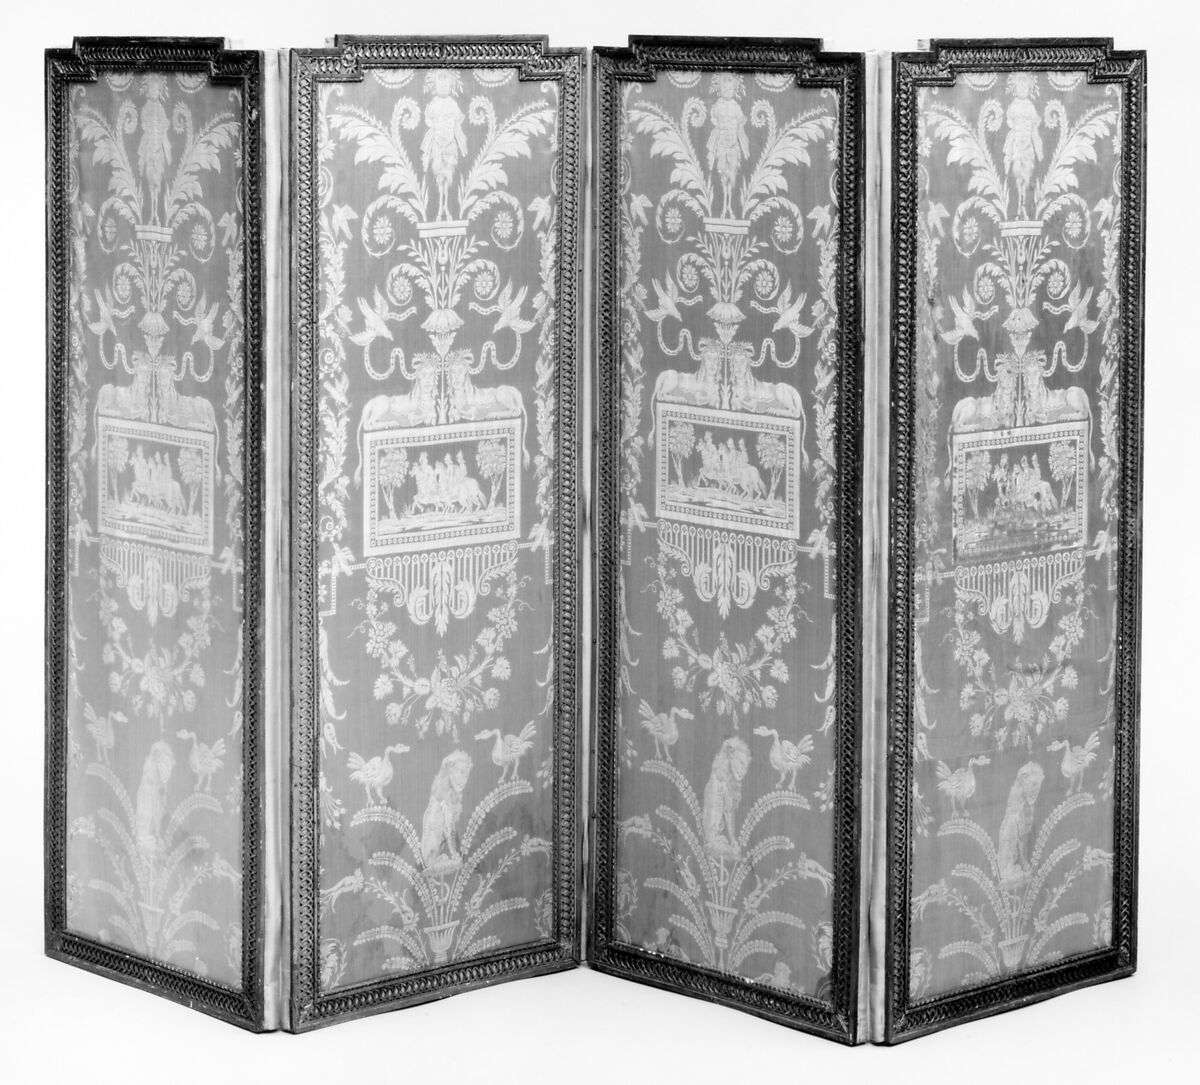 Four-leaf folding screen (Paravent), Carved and gilded walnut and poplar; upholstered with 18th-century blue and silver silk lampas, French 